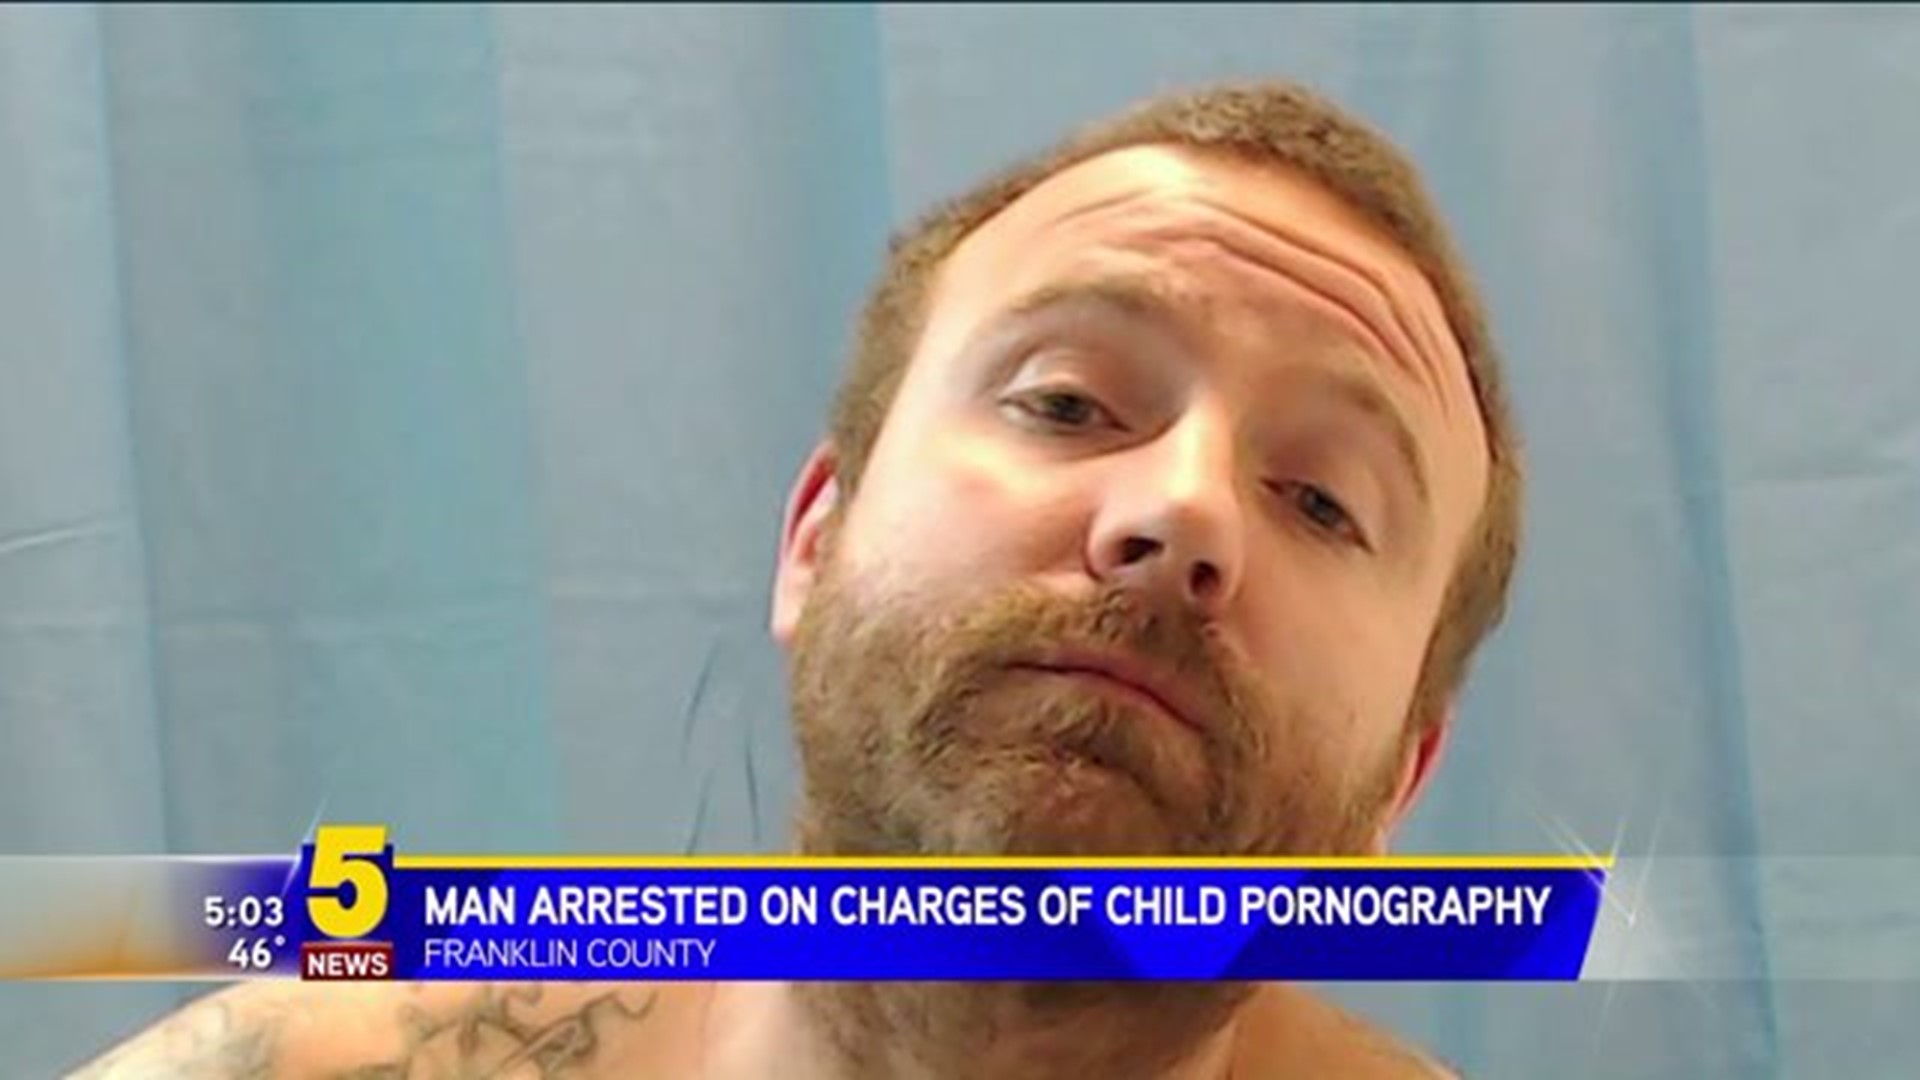 Man Arrested On Child Pornography Charges